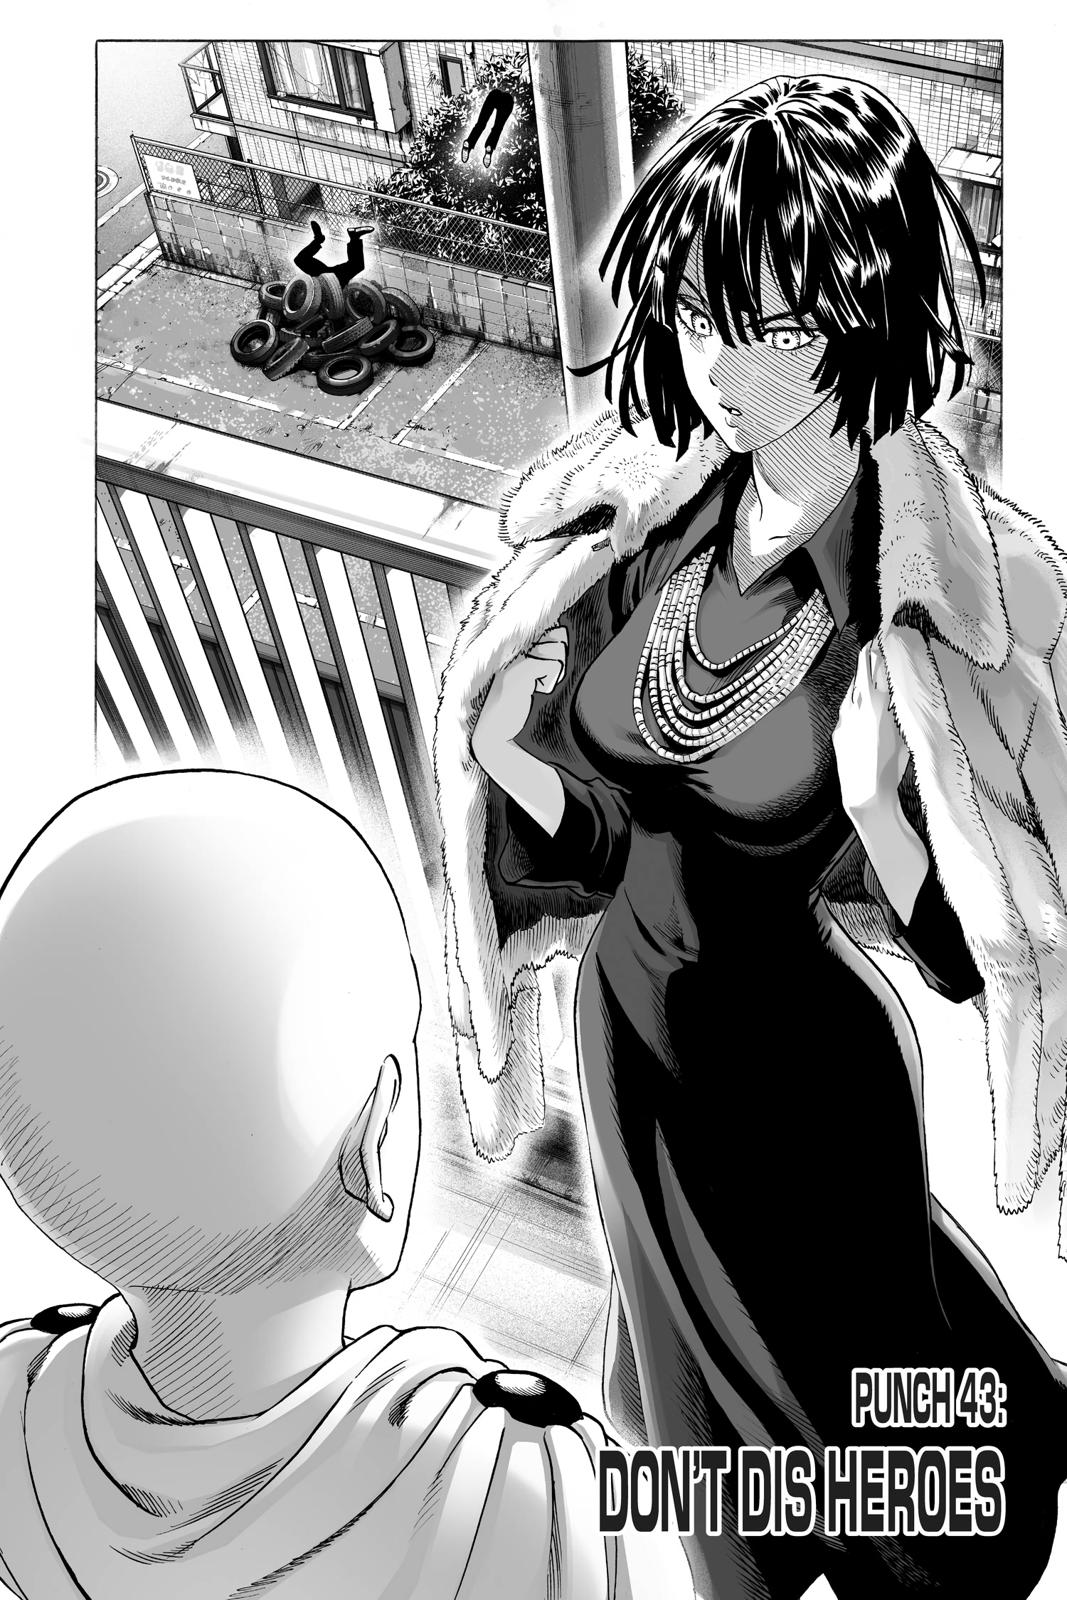 One-Punch Man, Punch 43 image 01